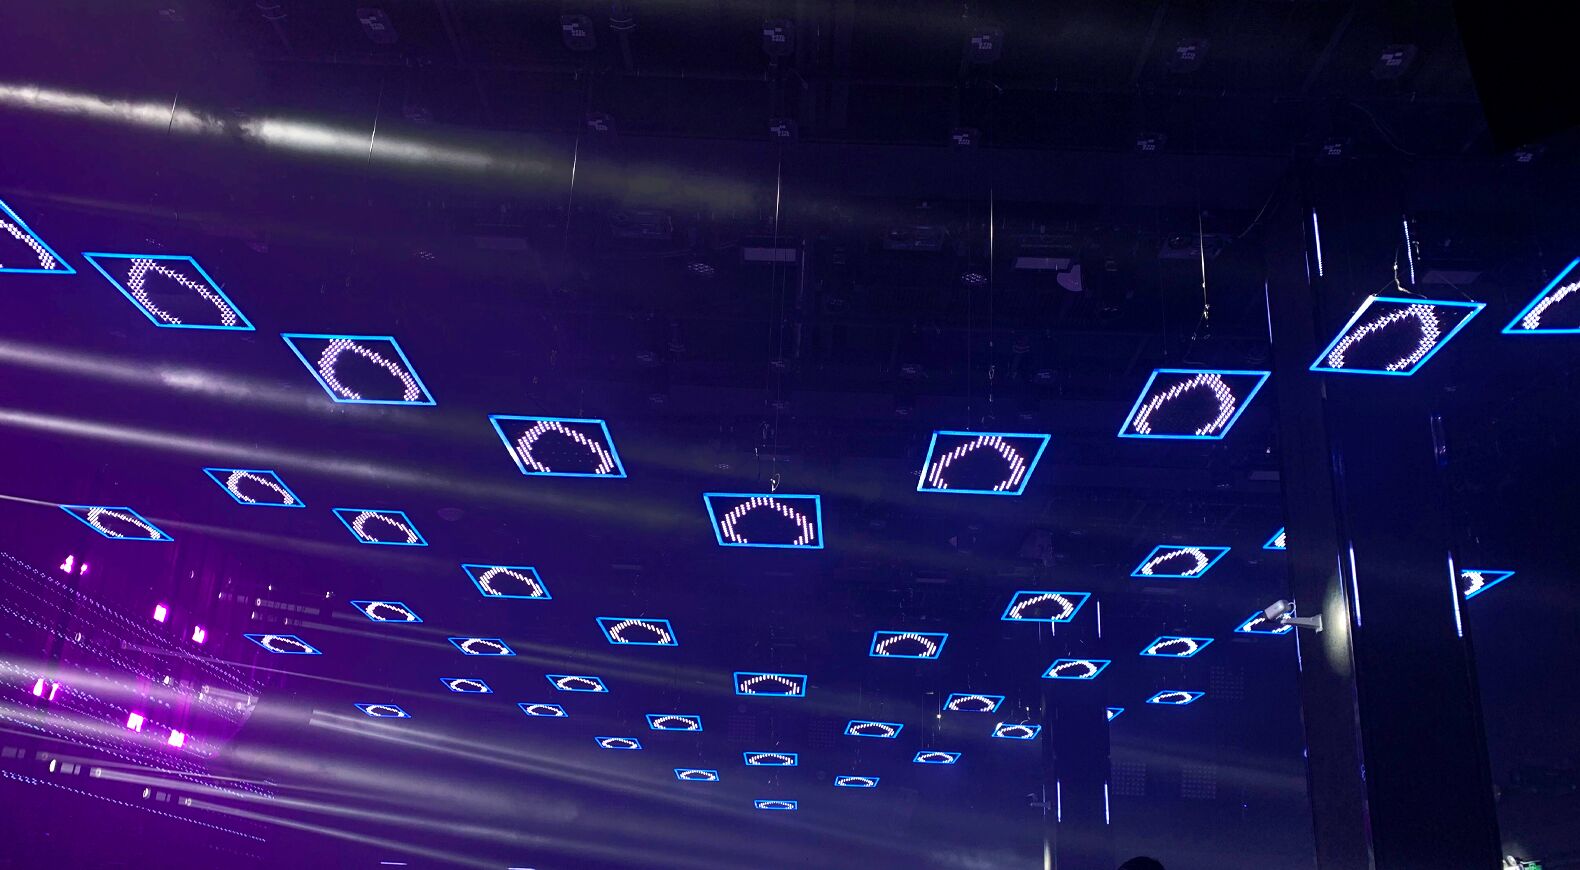 MAYBACH Club Designed DLB kinetic Quadrilateral lights system